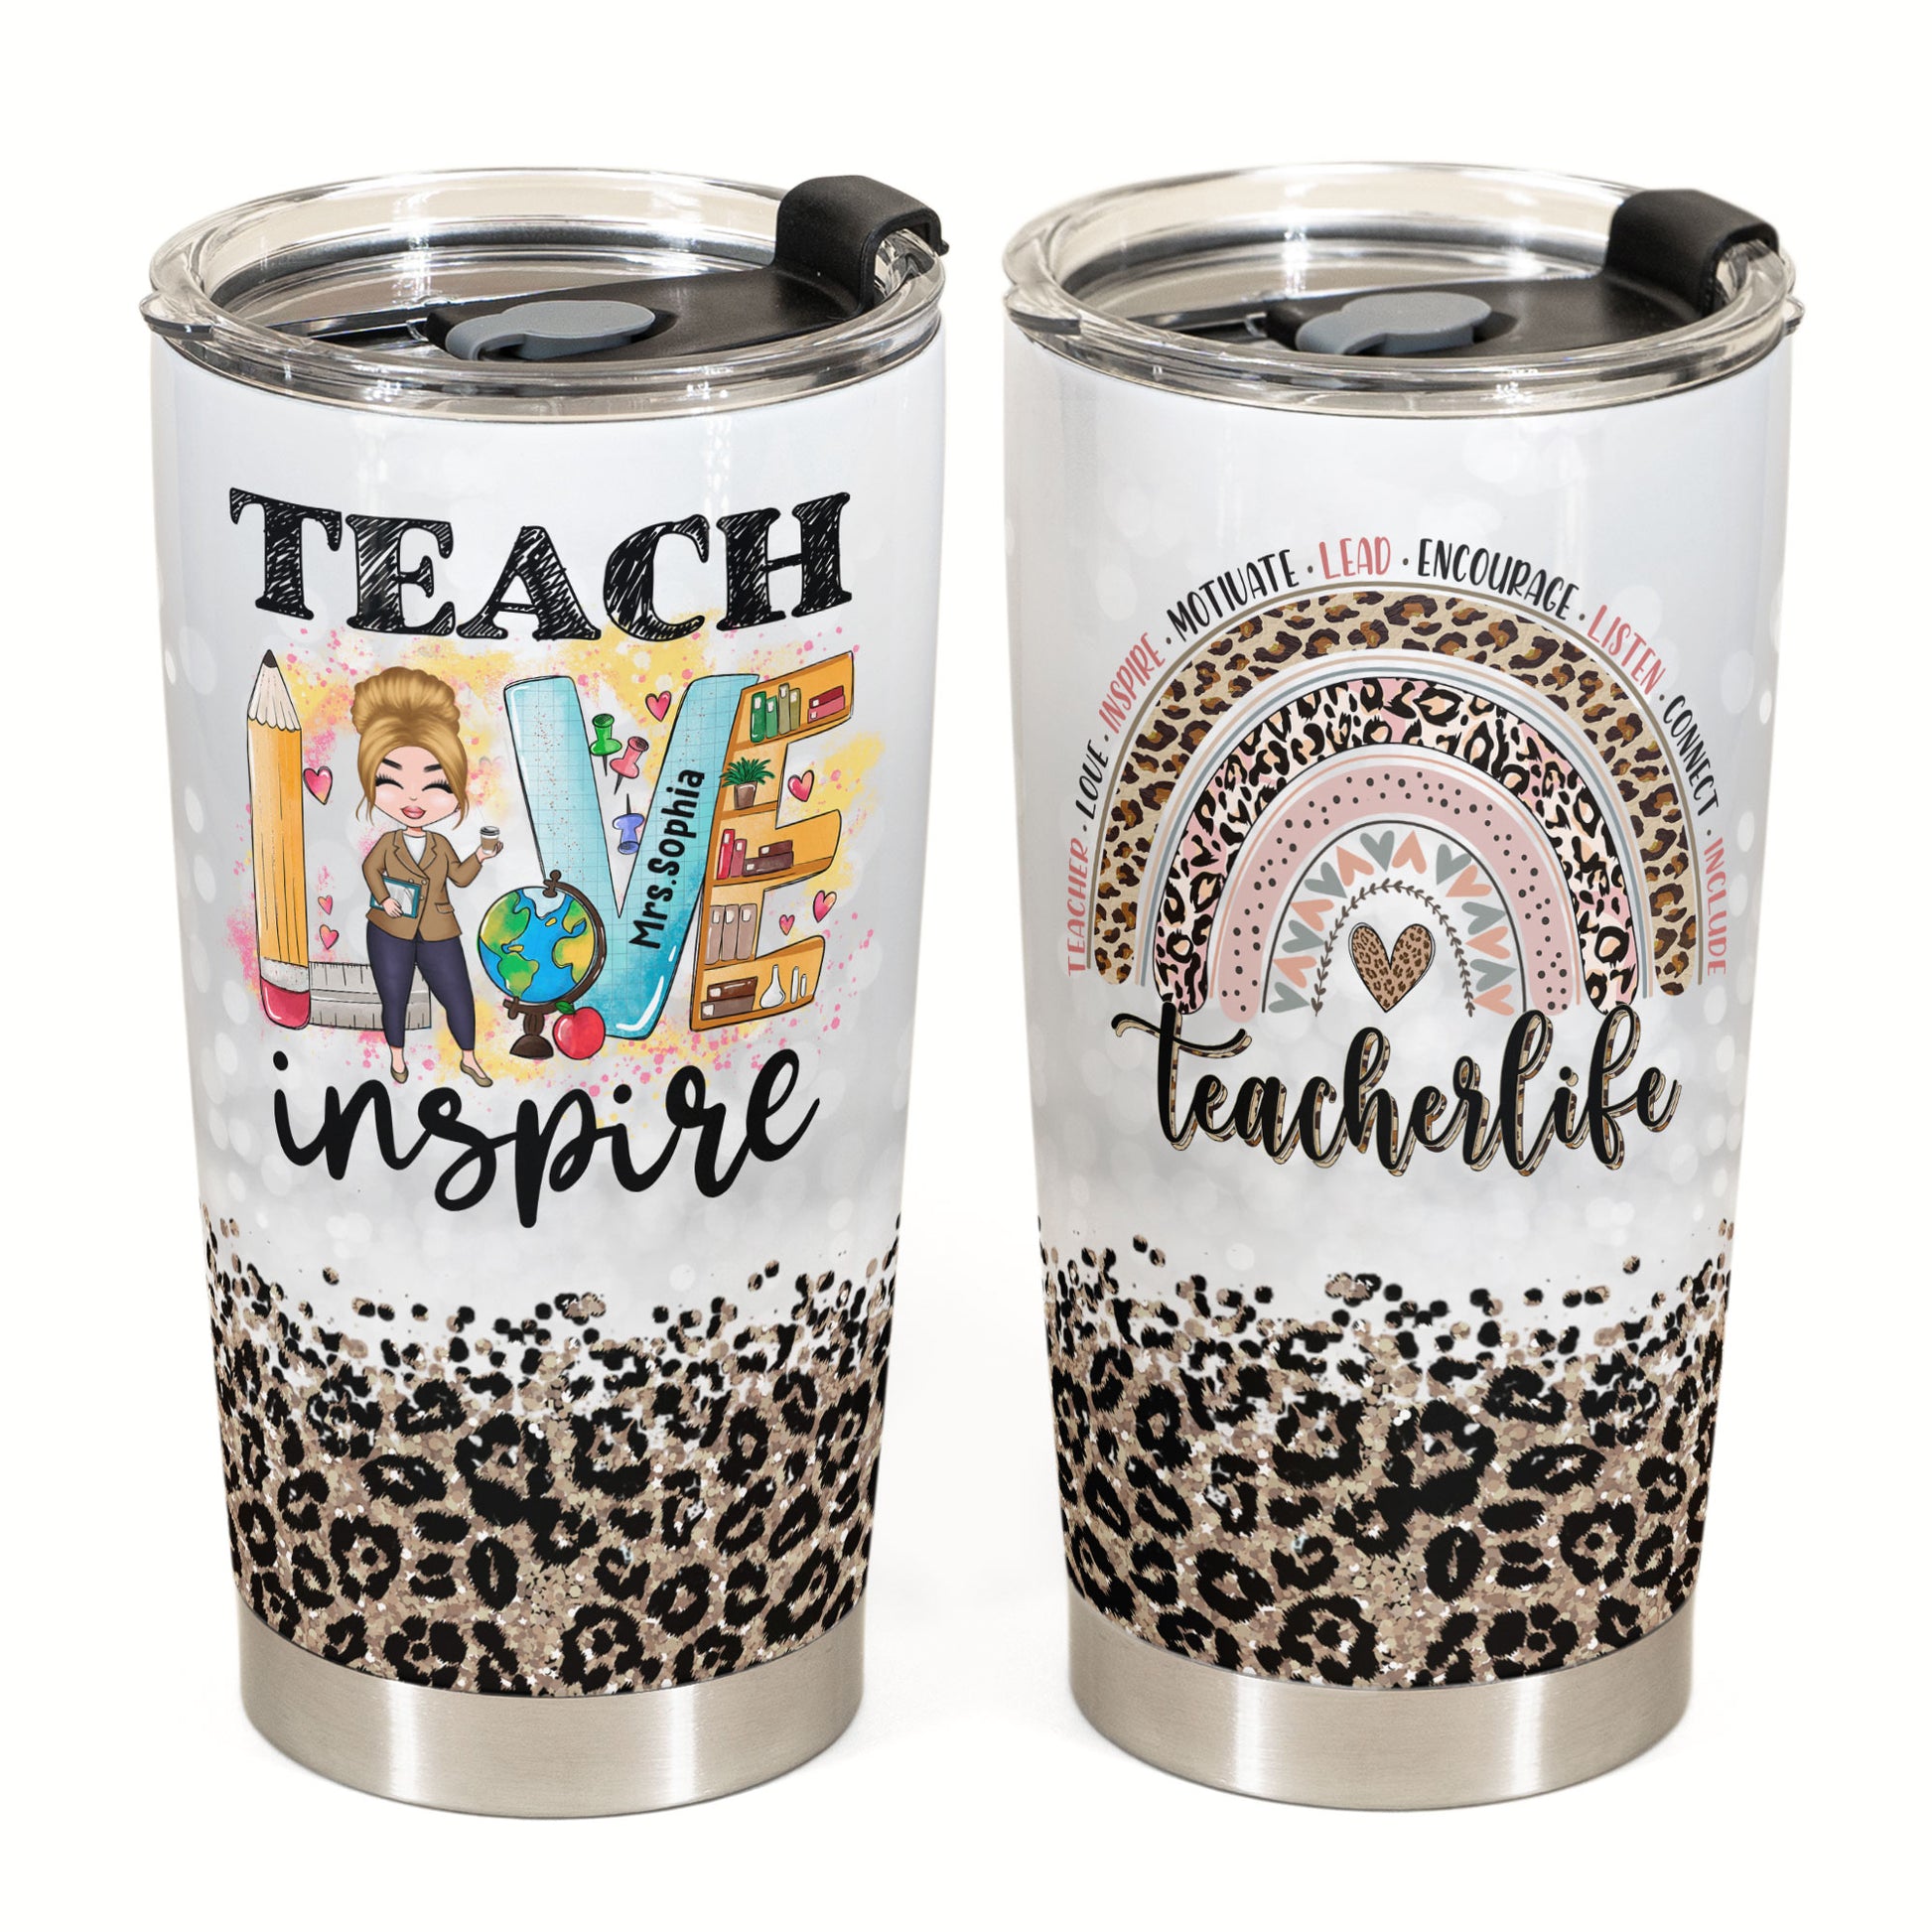 A Big Heart - Personalized Tumbler Cup - Birthday Gift For Teacher Col –  Macorner